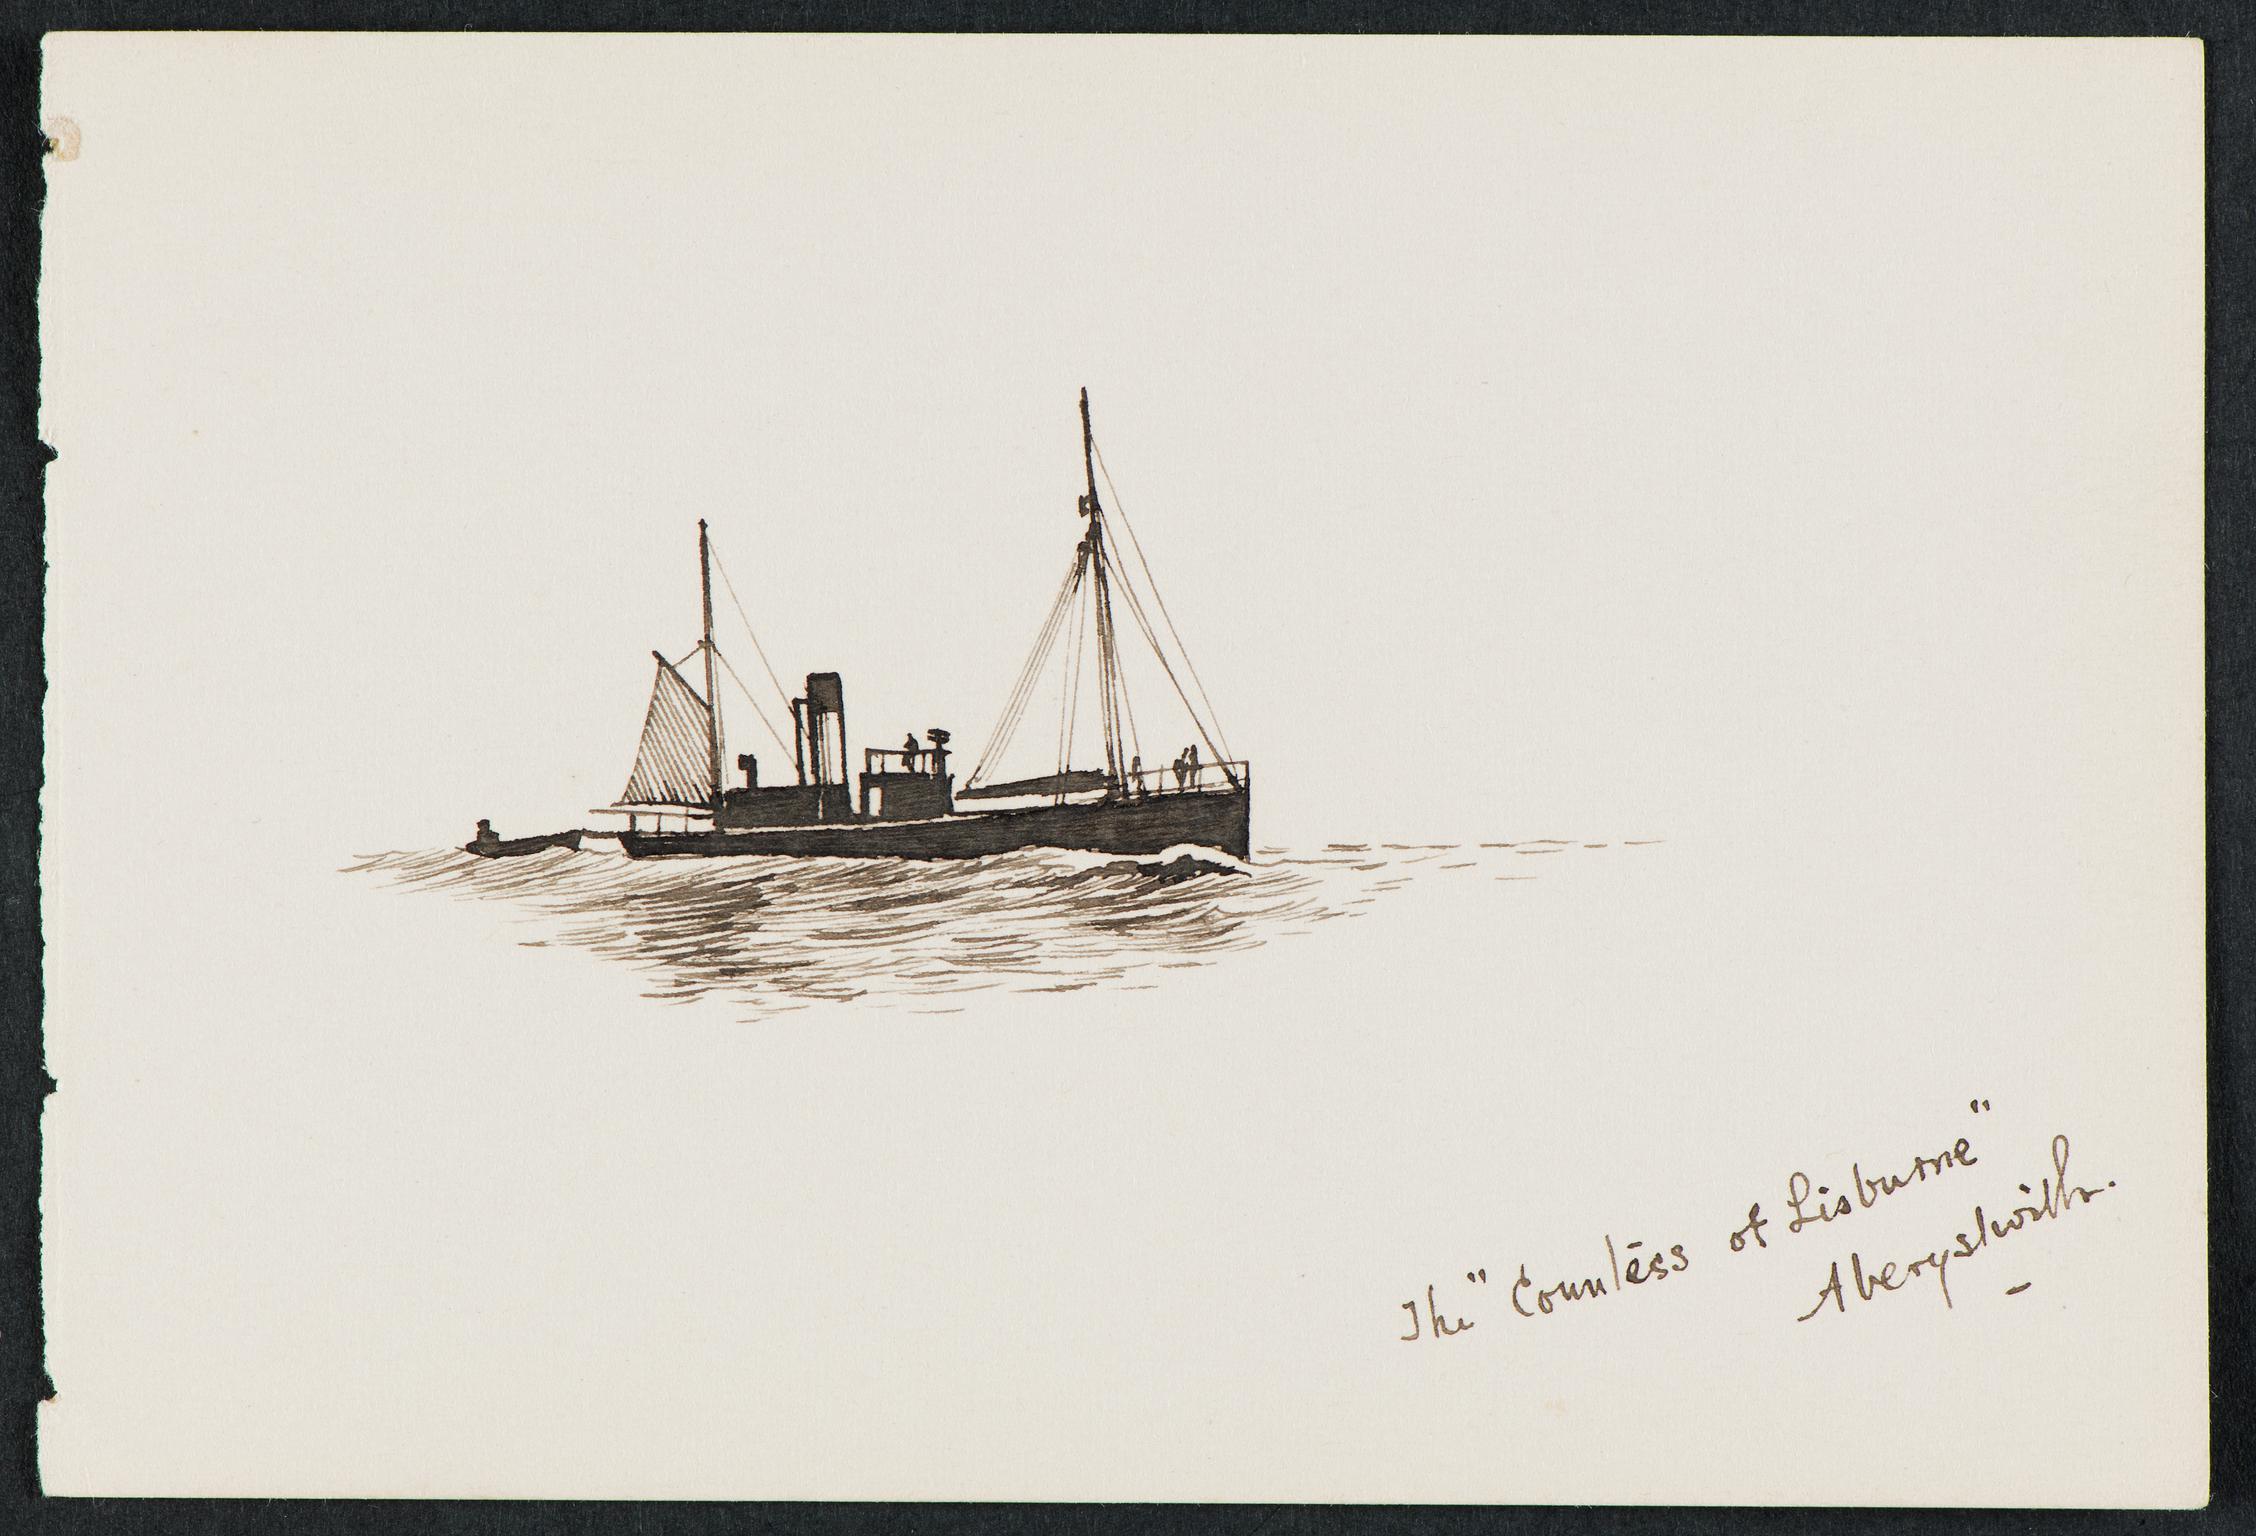 The "Countess of Lisburne", Aberystwyth (drawing)